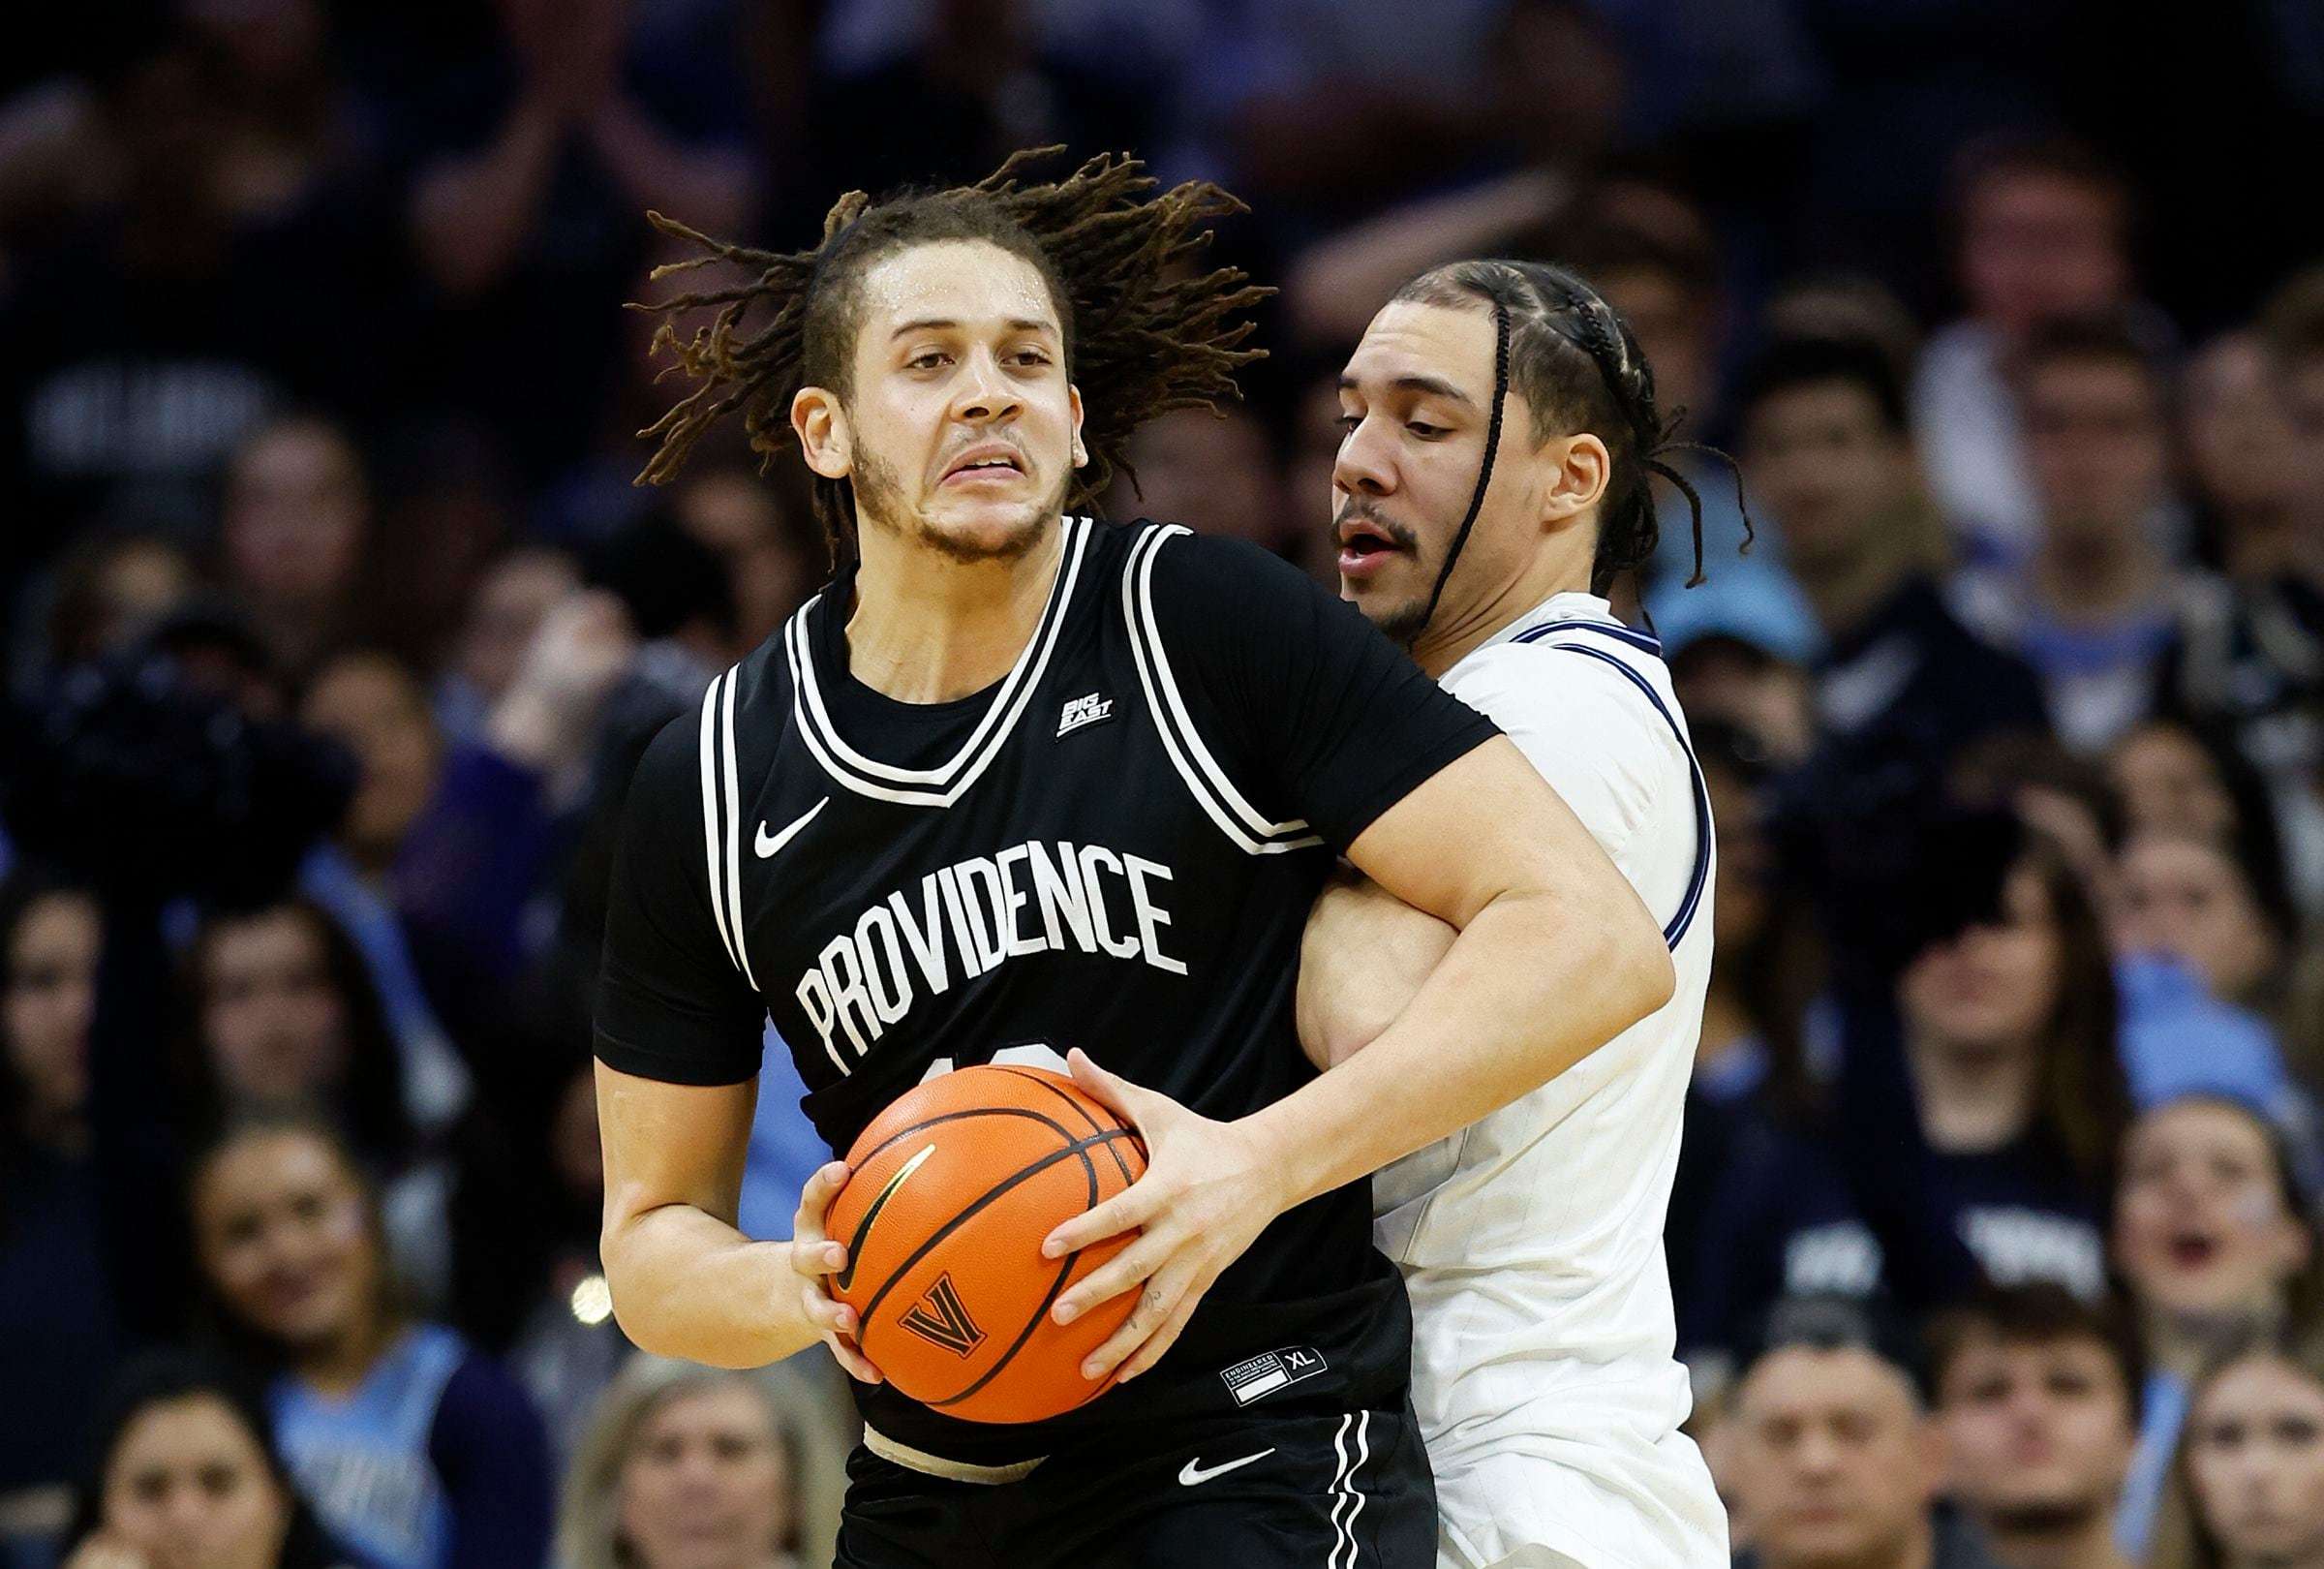 in a must-win spot, villanova rolled past providence and might have saved its season